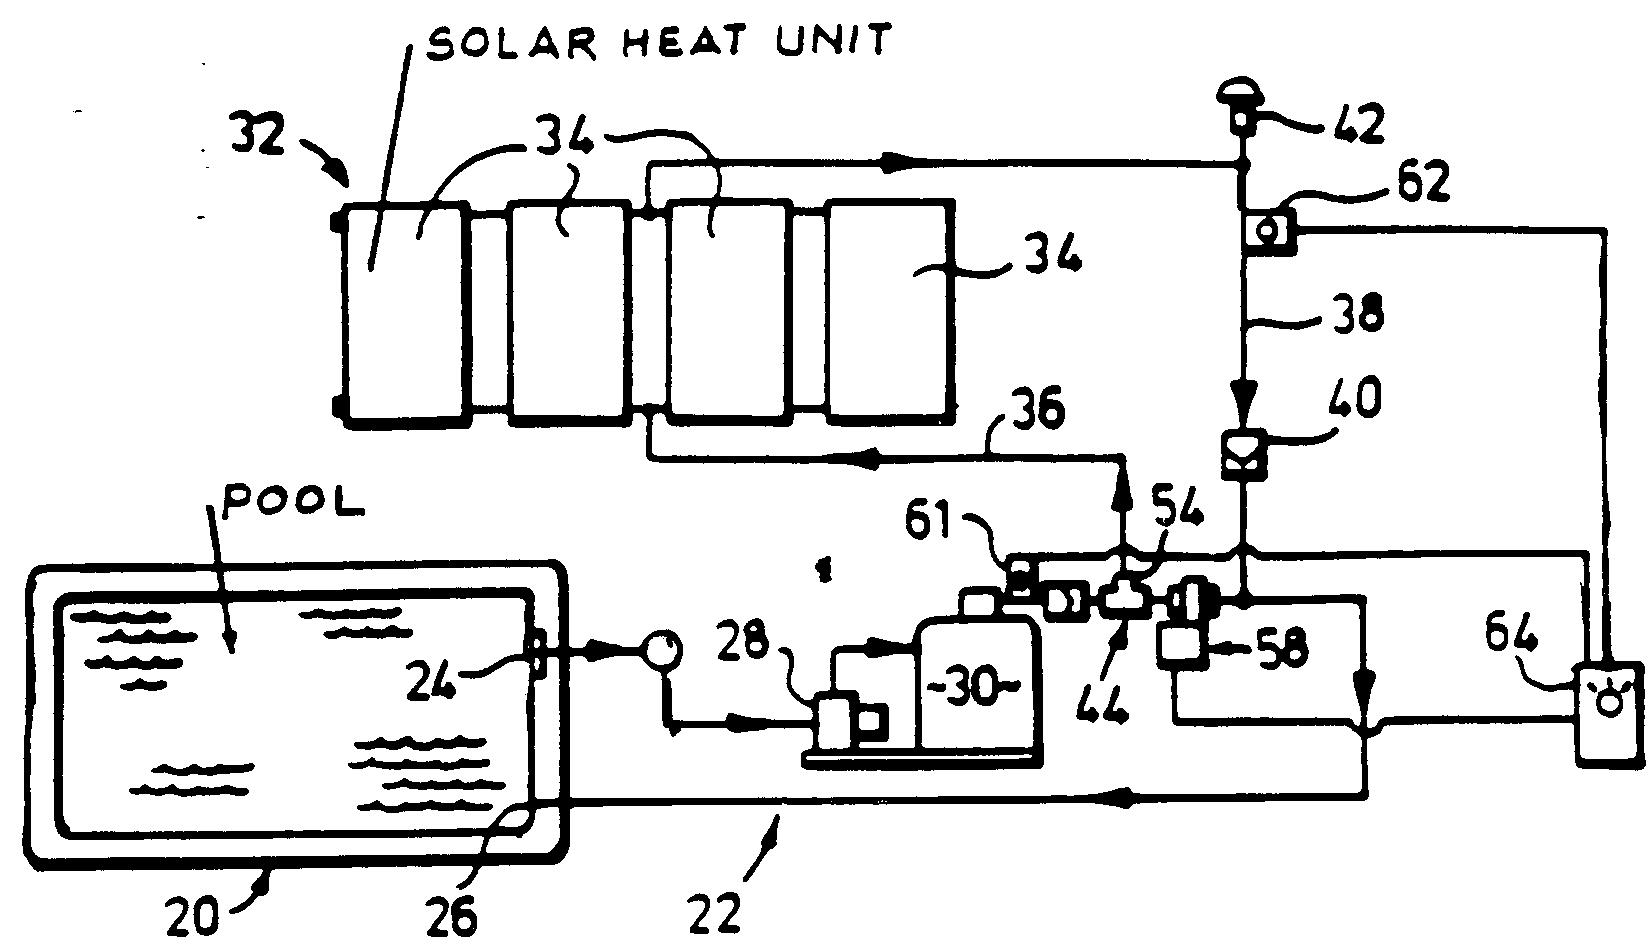 A solar heating system for a swimming pool and the like isdisclosed.  The system includes a circulation circuit having a pumpby which water is withdrawn from the pool, passed through a filter,and returned to the pool.  A solar collector assembly is providedand has flow and return lines connected in said circuit.
